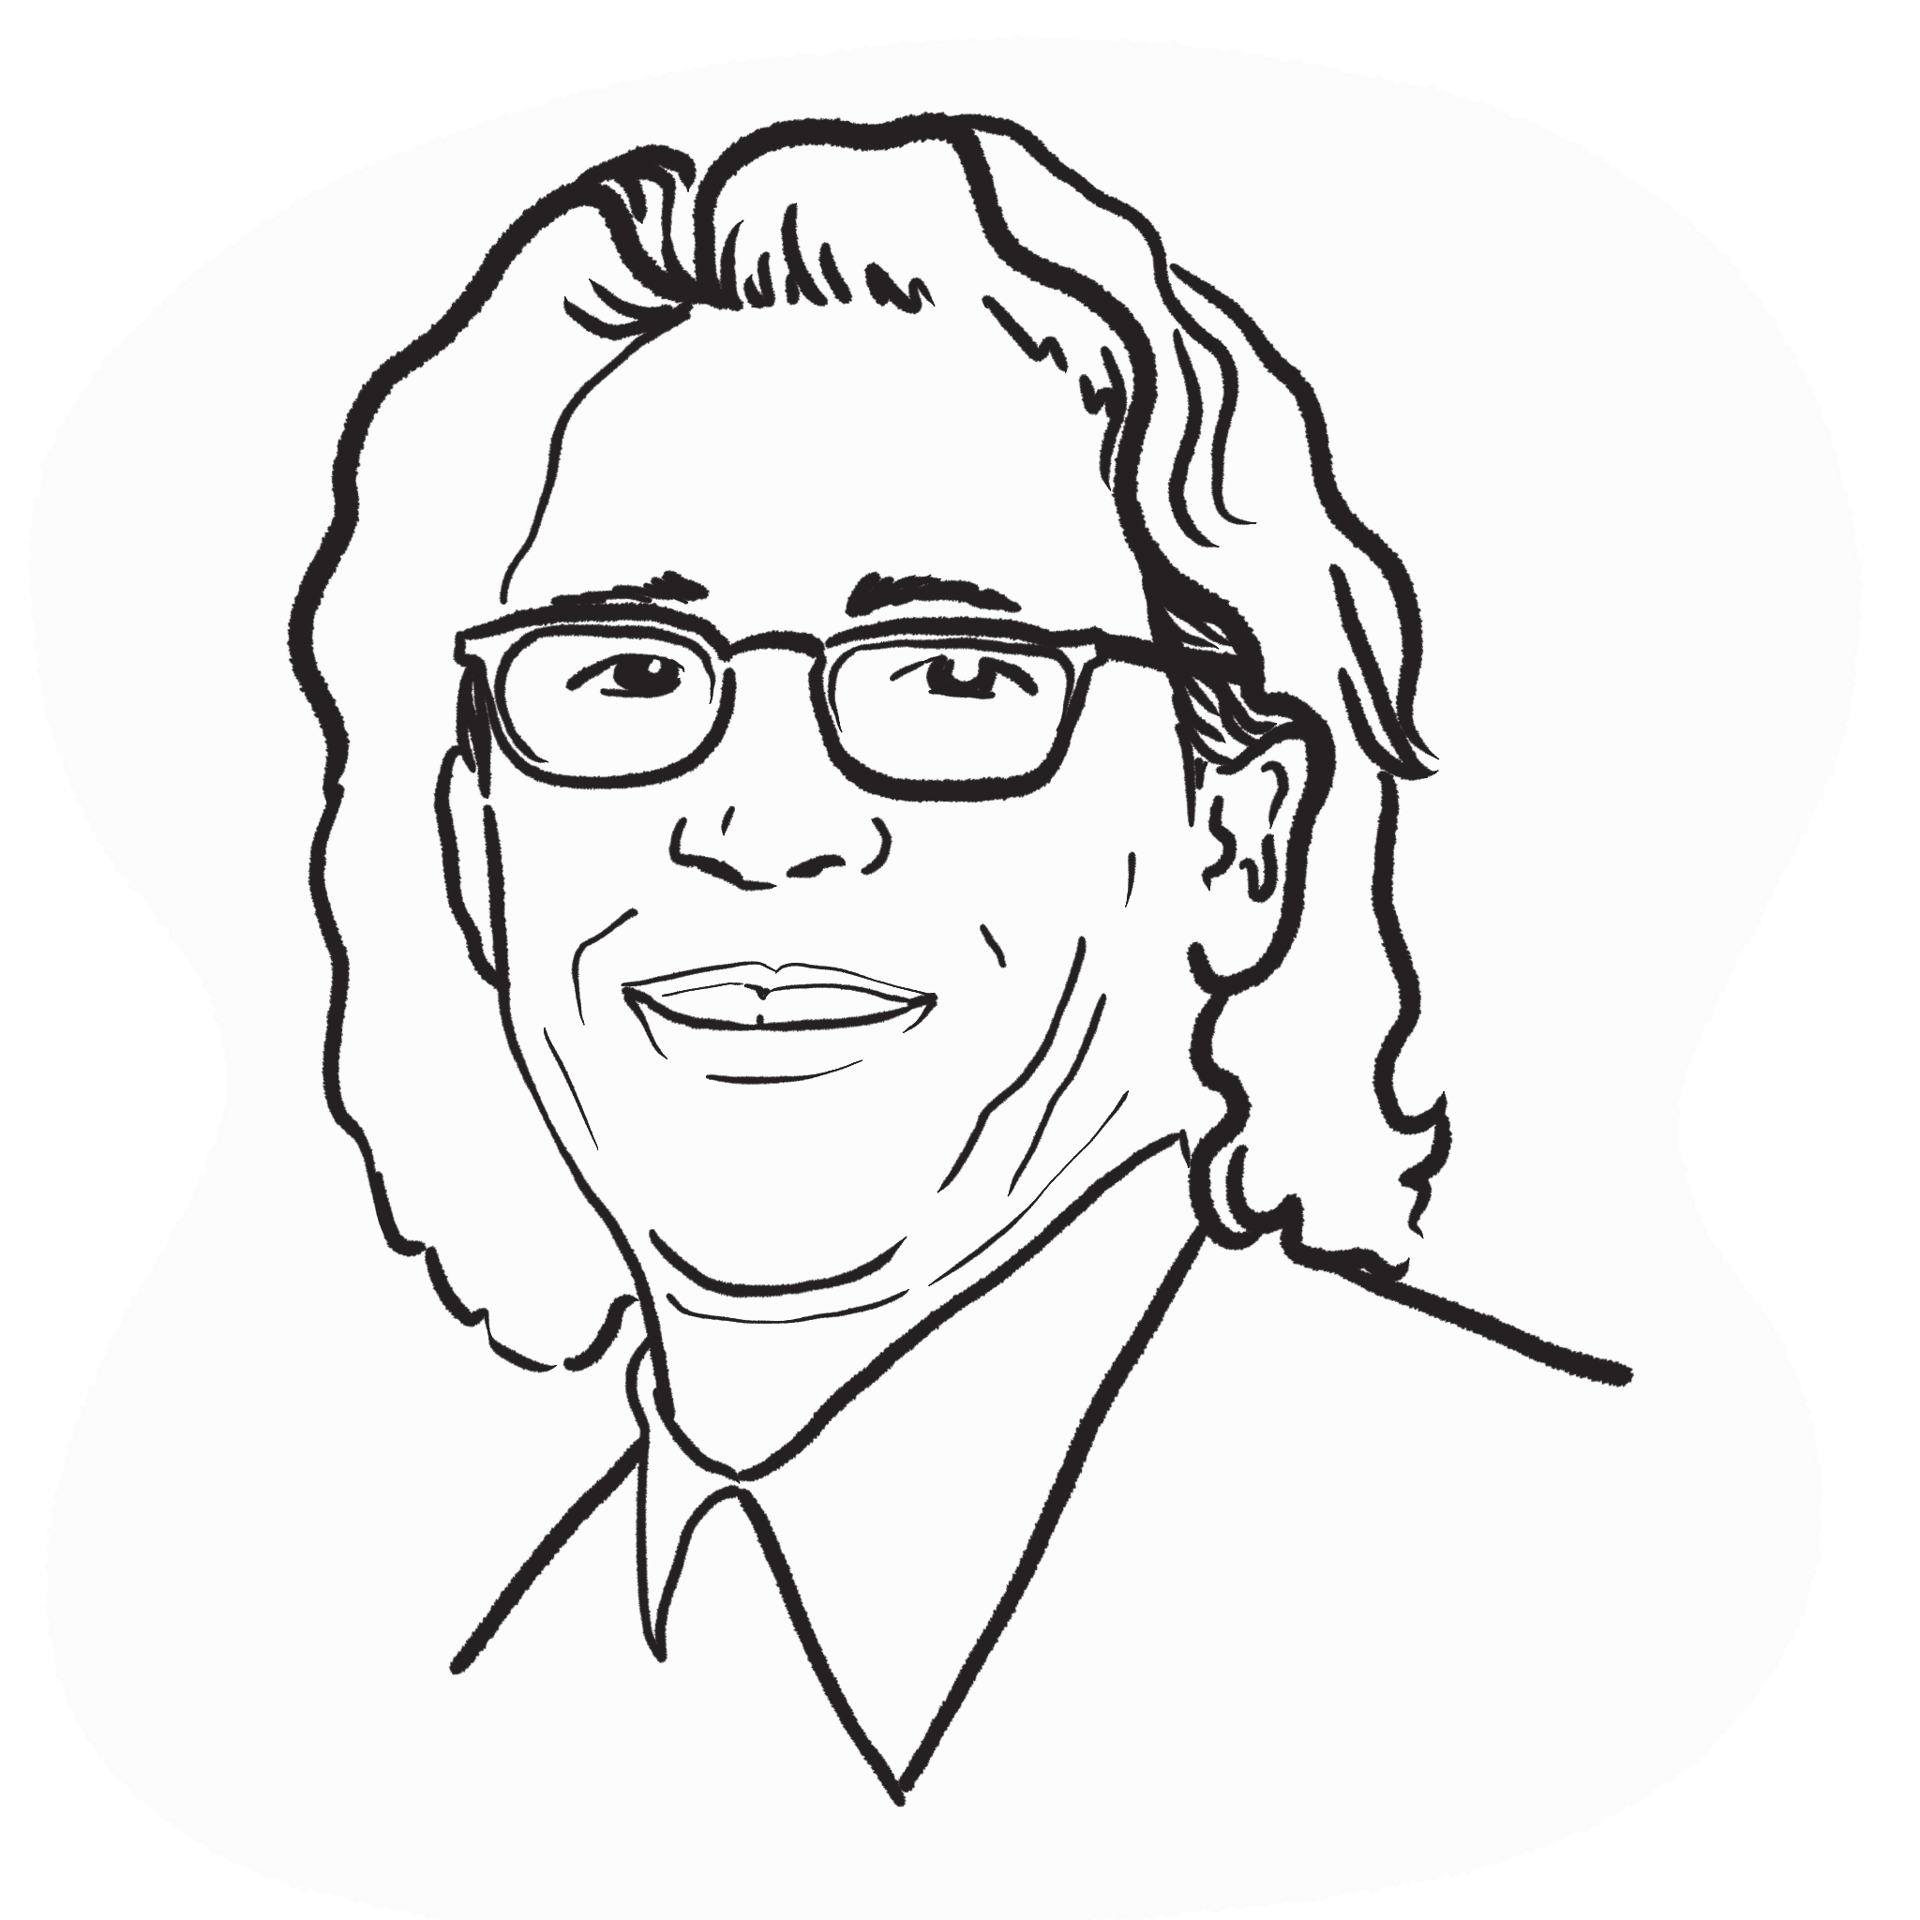 Illustration of Steve Chassman, a man with long hair and glasses in a suit.